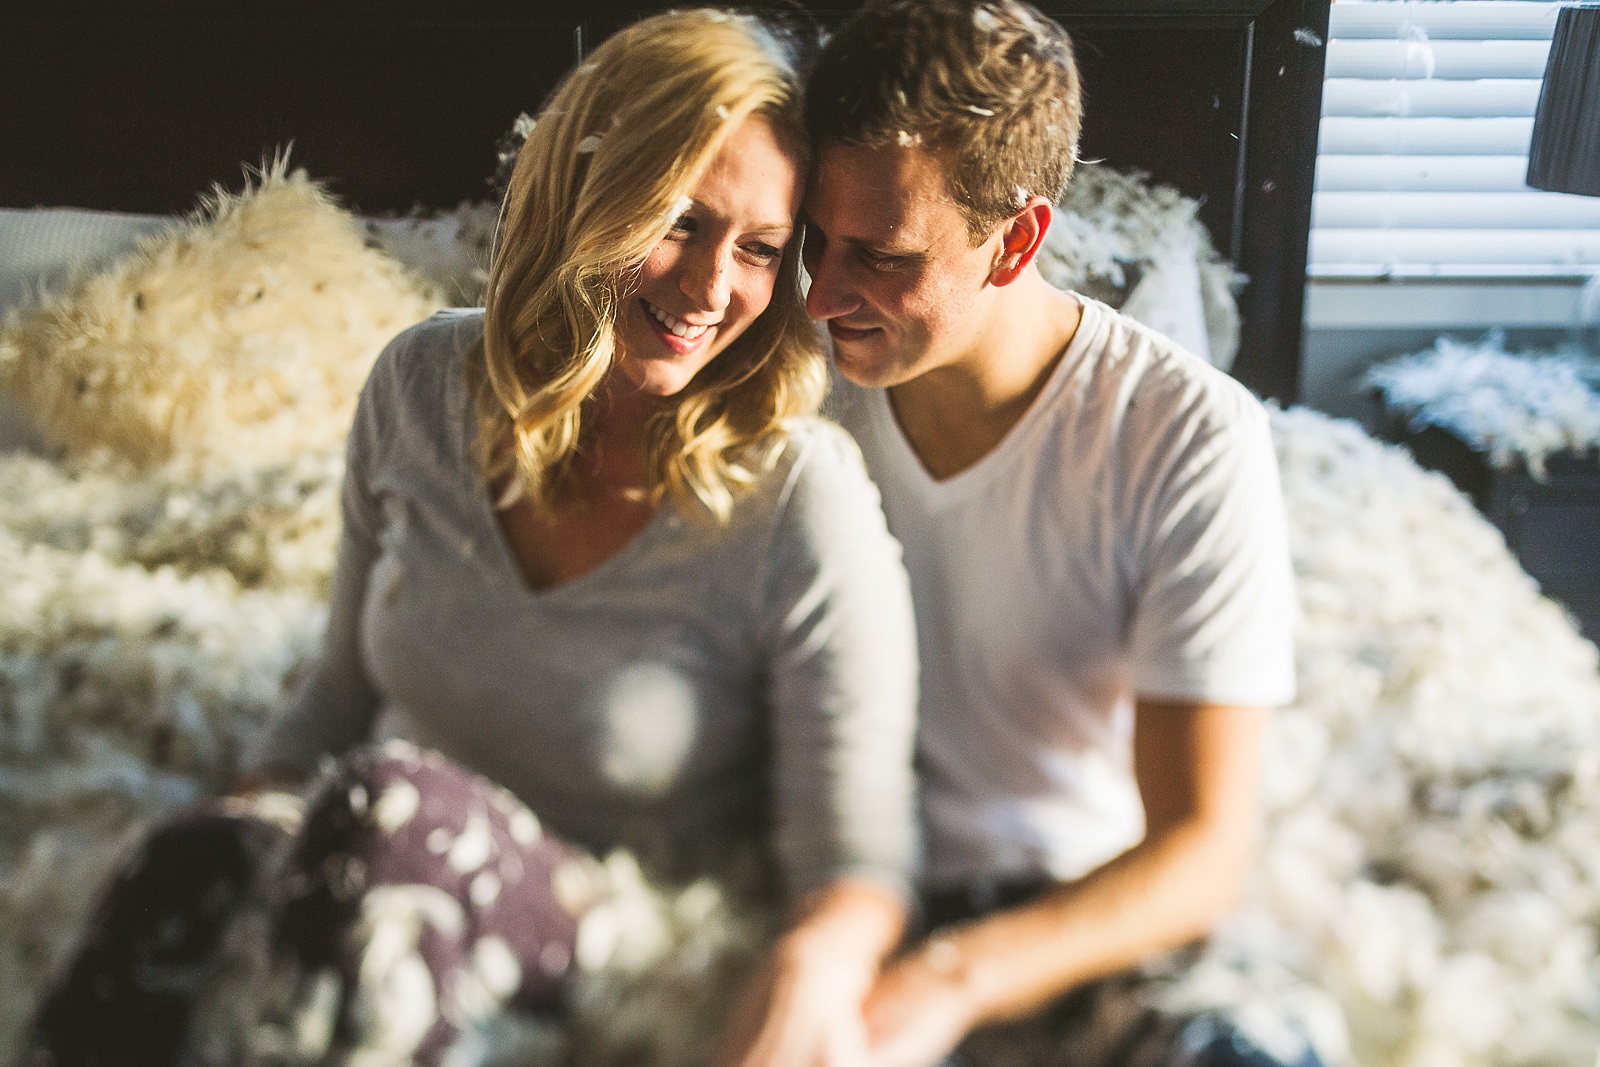 08 home engagement sessions - Chicago In-home Engagement Sessions // Jessica + Bill